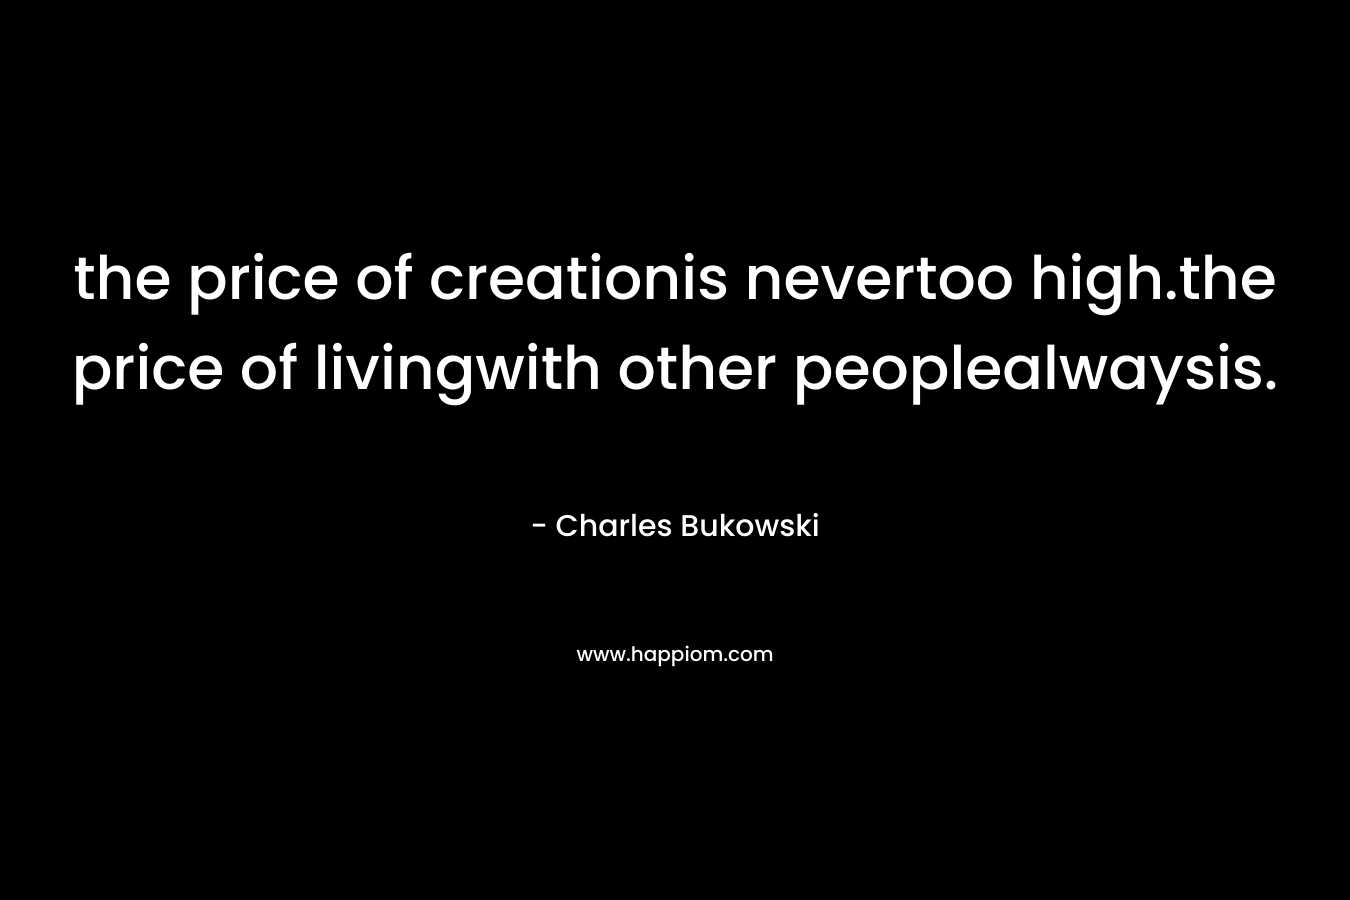 the price of creationis nevertoo high.the price of livingwith other peoplealwaysis.